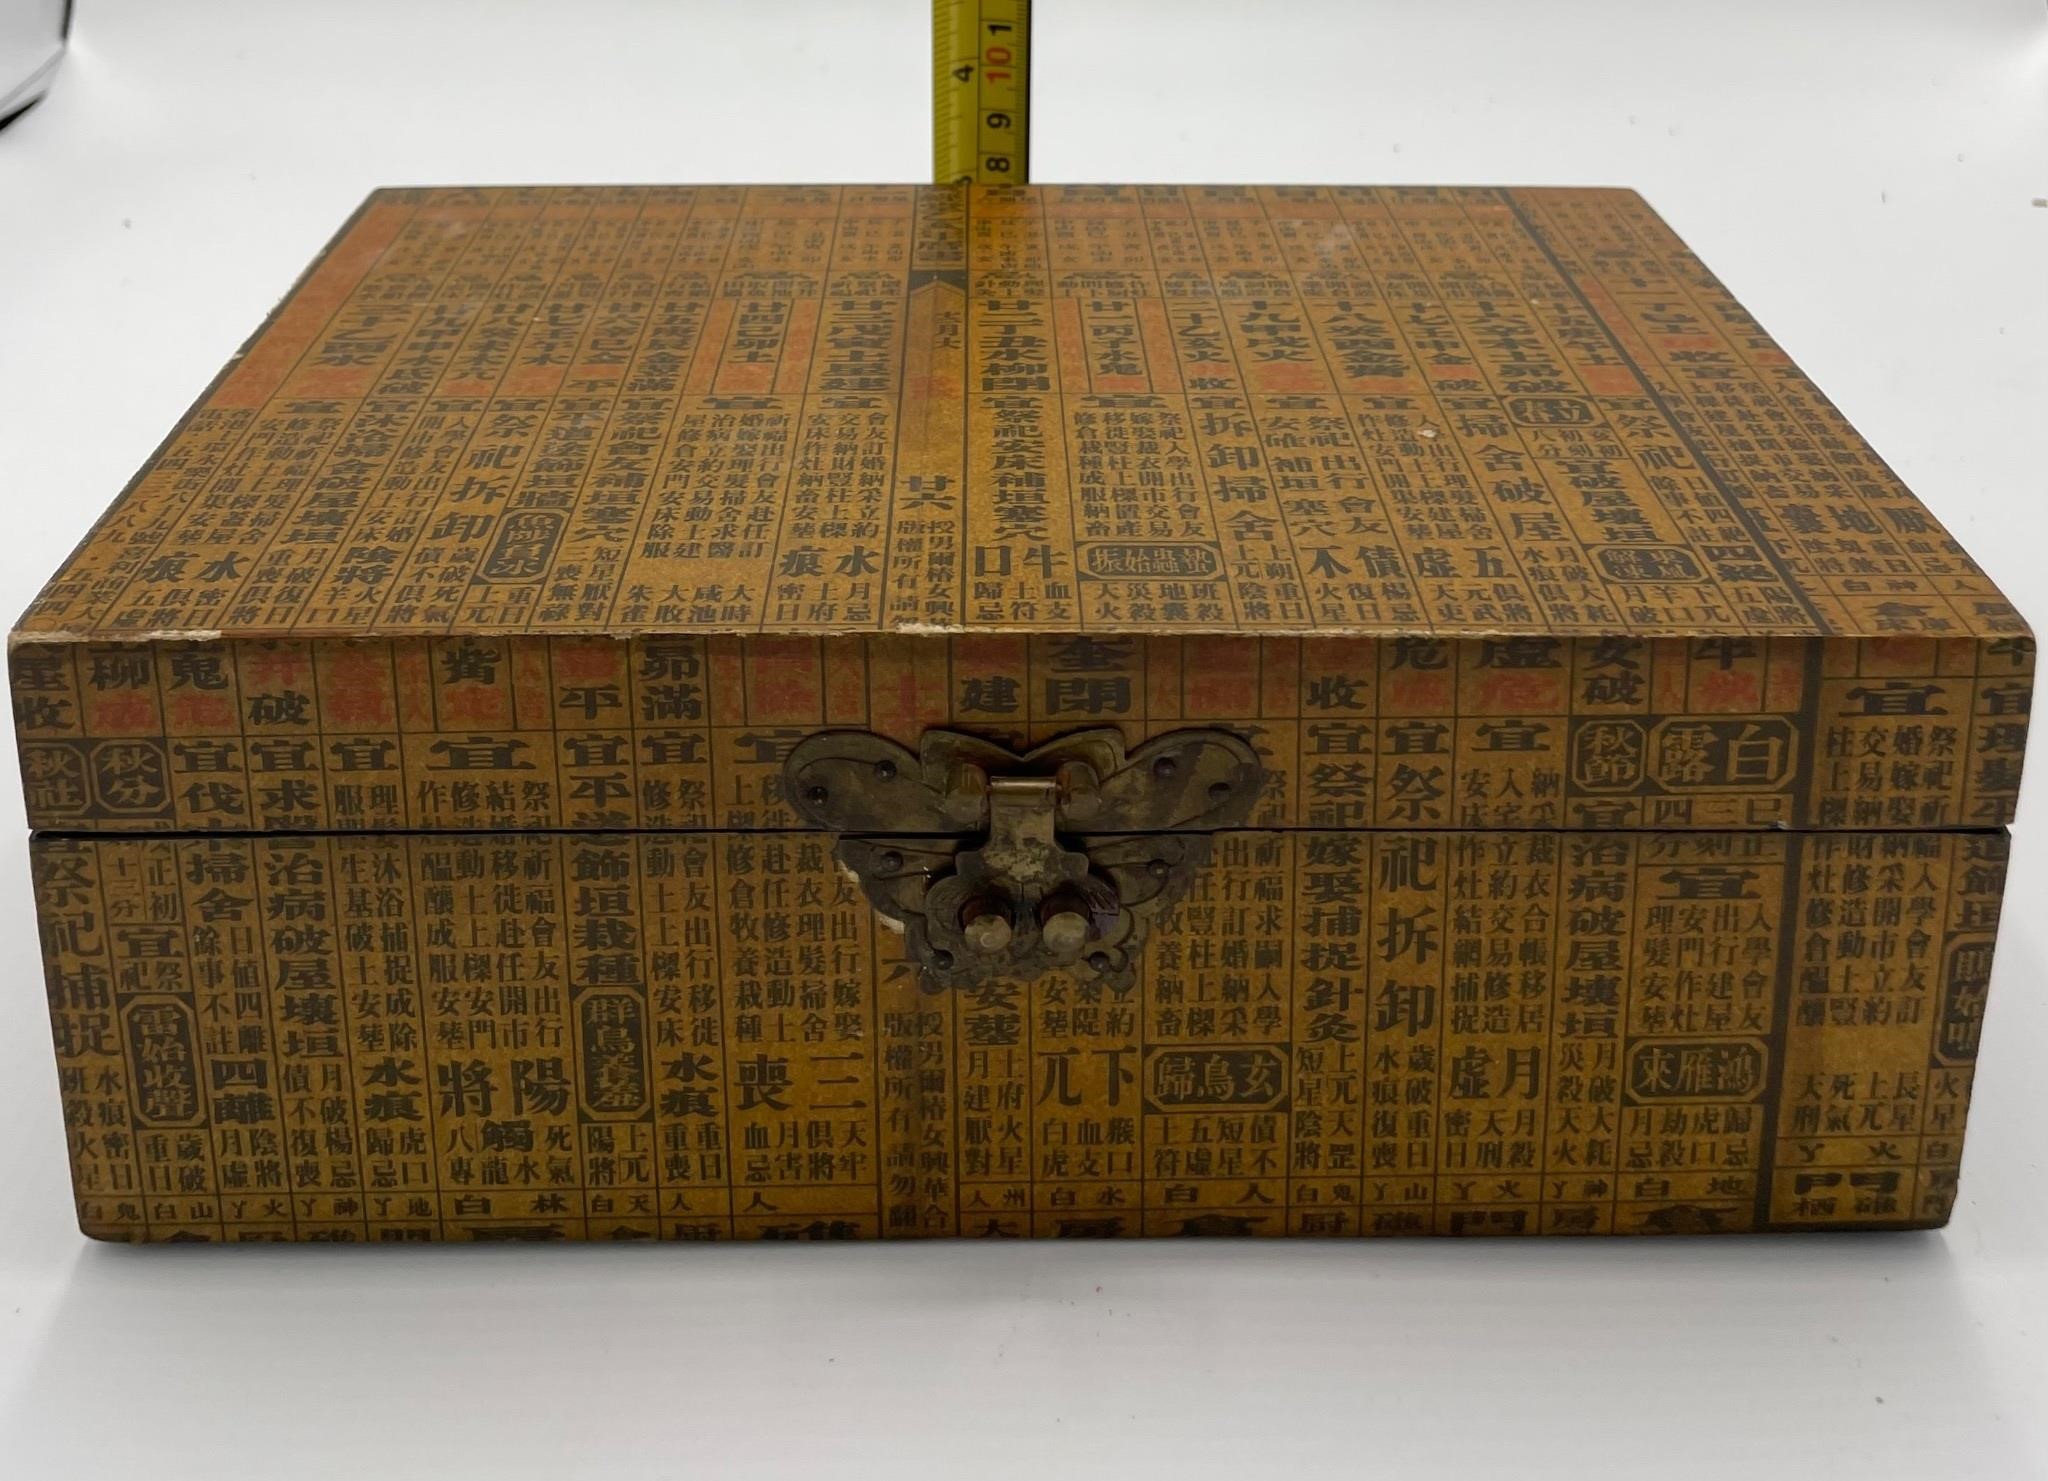 Oriental Wooden Jewelry Box - Made in China